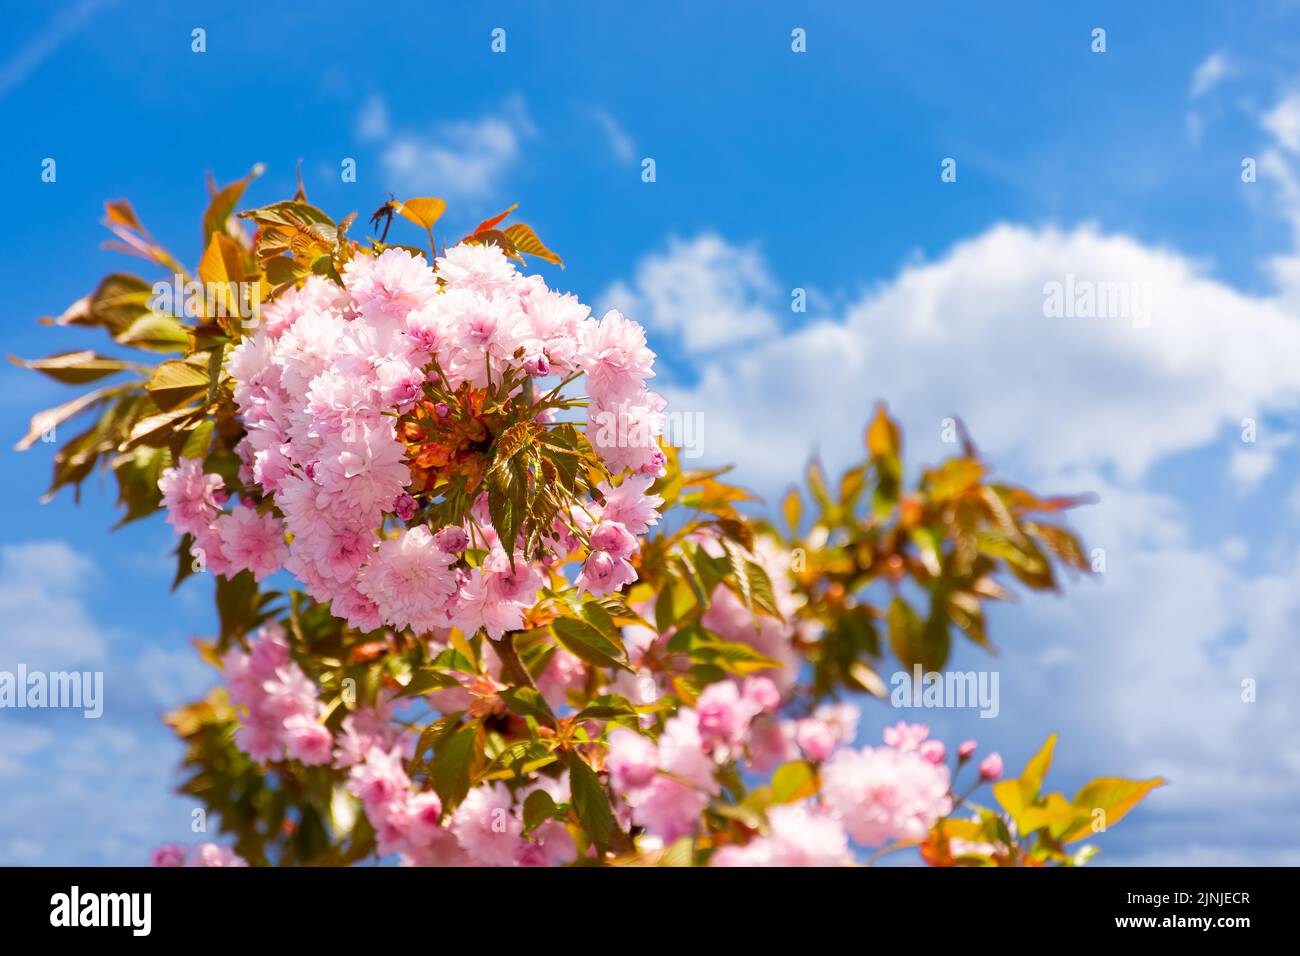 sakura blossom in april. branches of tree with pink flowers beneath a blue sky. beautiful floral nature background in the springtime garden Stock Photo